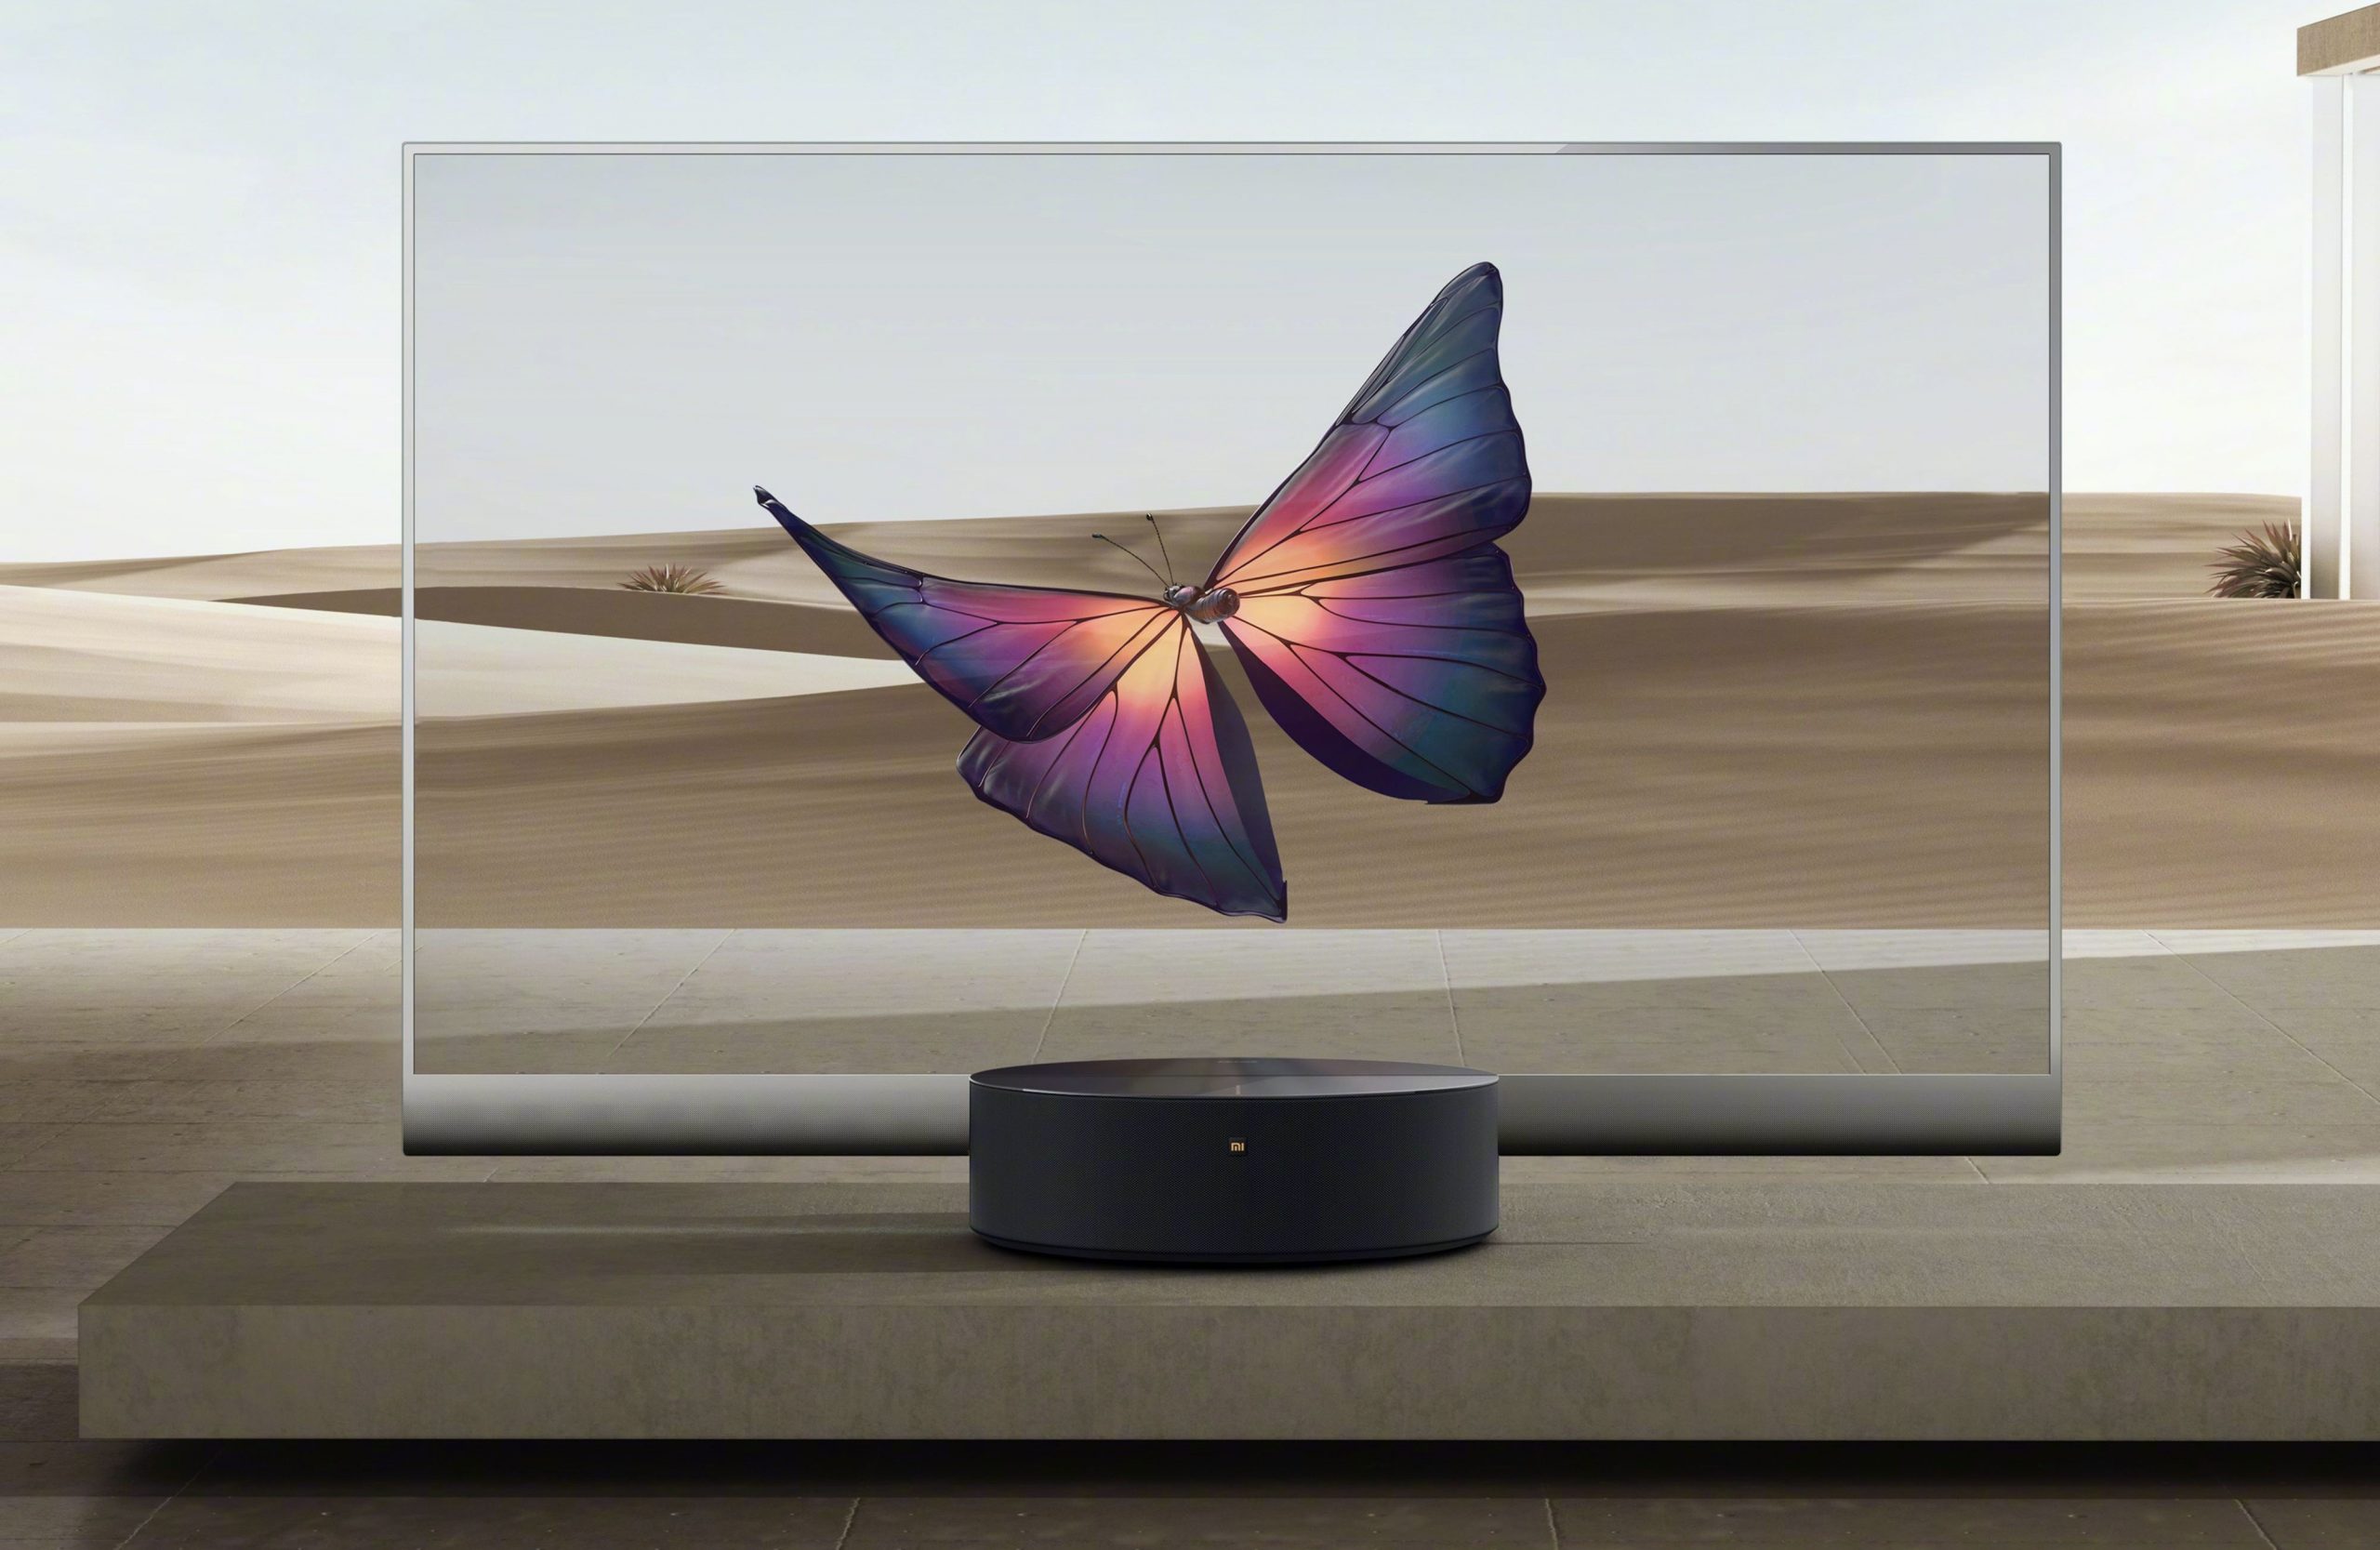 Xiaomi Mi TV LUX OLED Transparent Edition is the cheapest transparent TV at 49,999 yuan ($7,195)